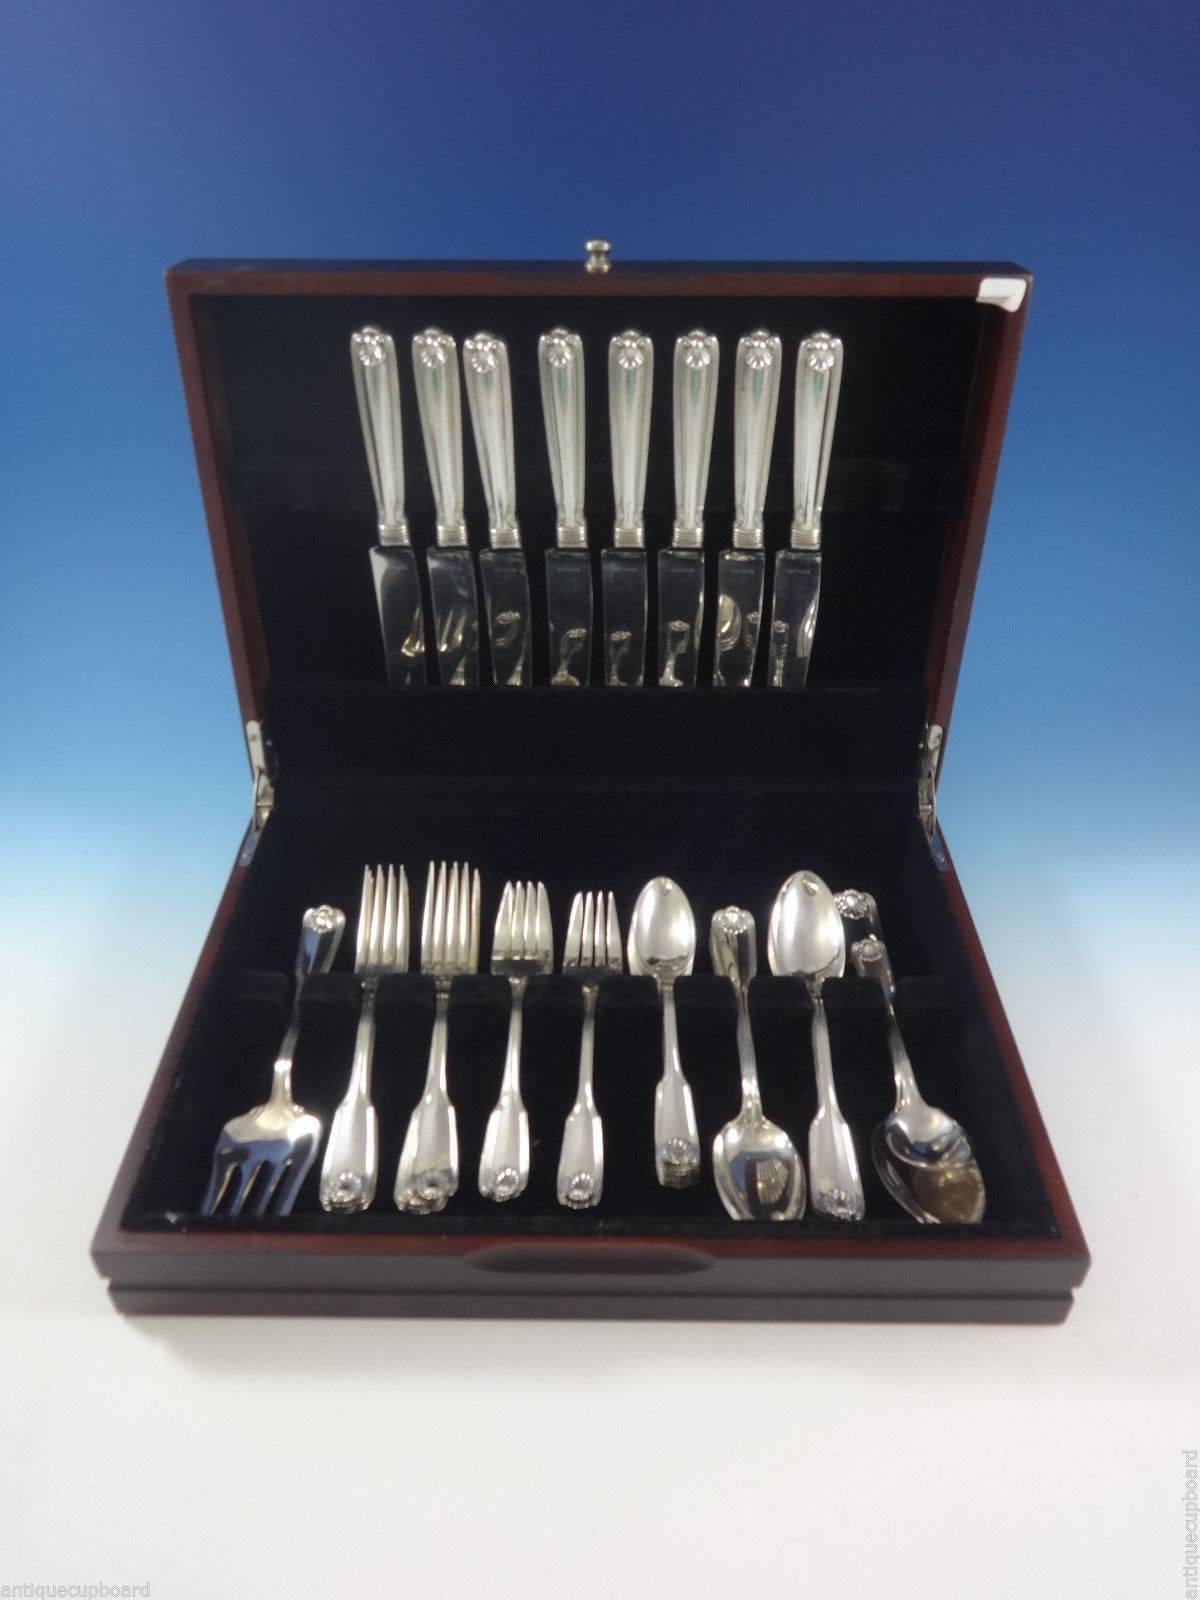 Benjamin Franklin by Towle sterling silver flatware set, 43 pieces. This set includes: 

Eight knives, 9